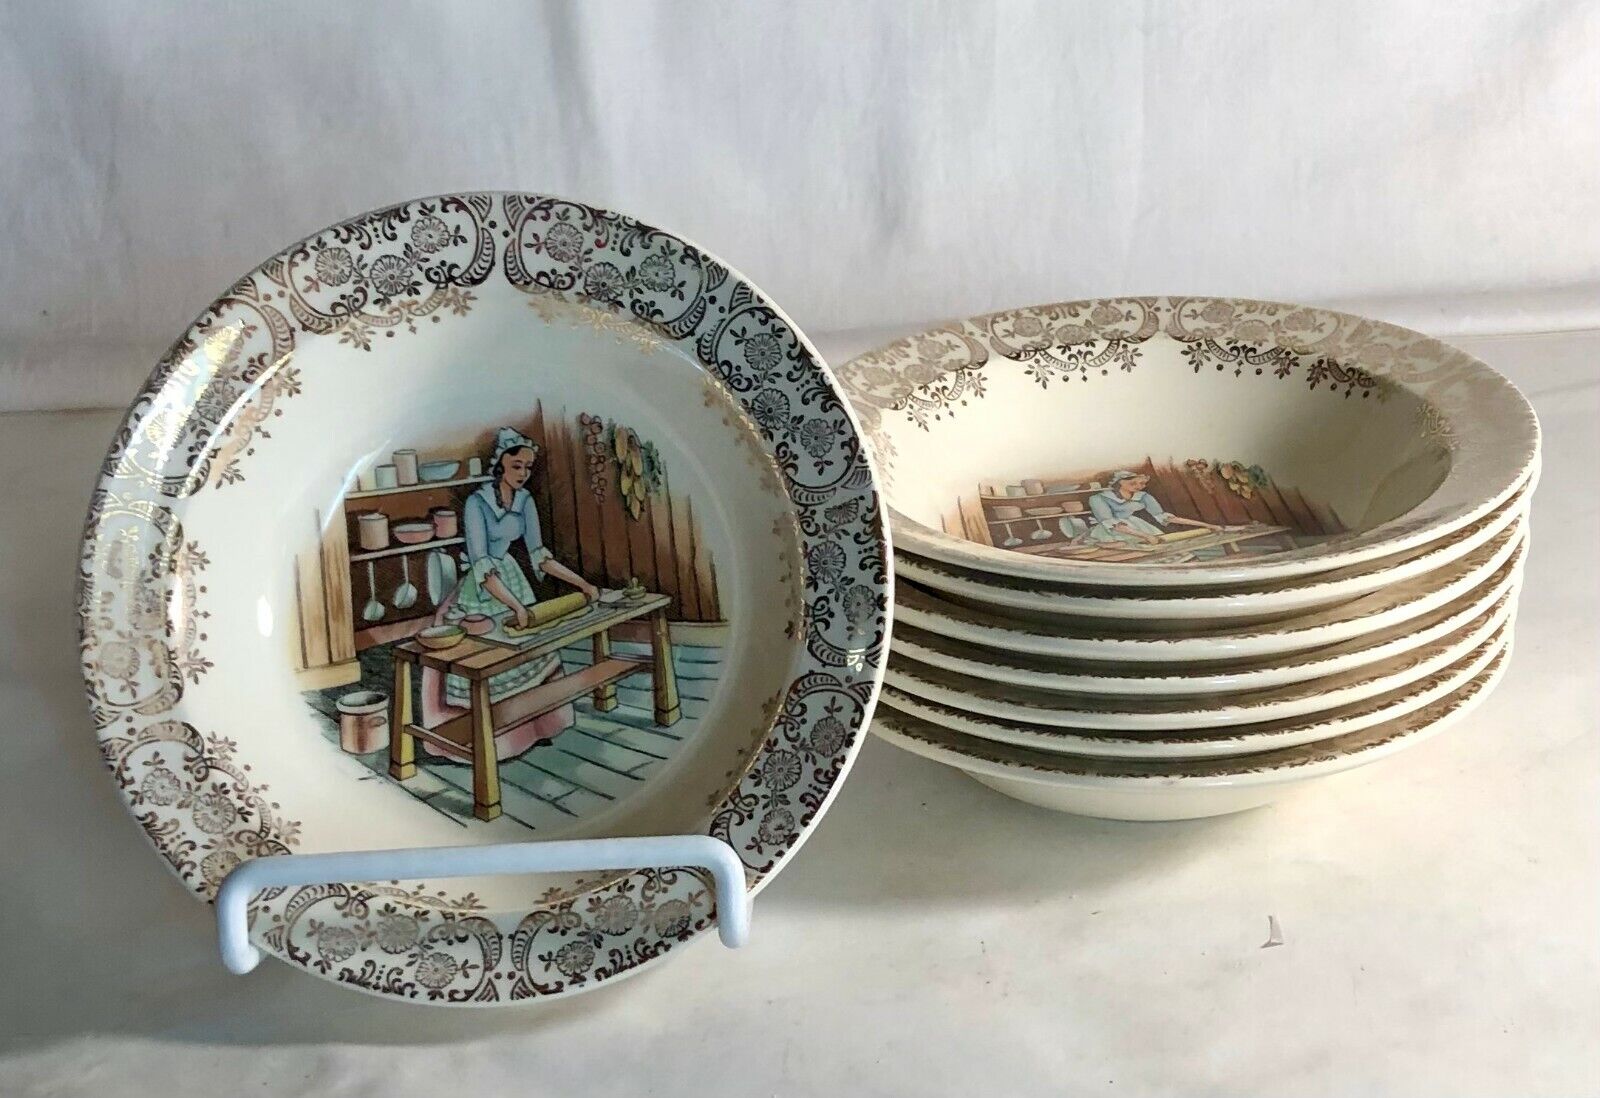 8 Taylor Smith &Taylor Colonial Kitchen Hearth 5 1/2" Rimmed Dessert Bowls Taylor Smith Taylor